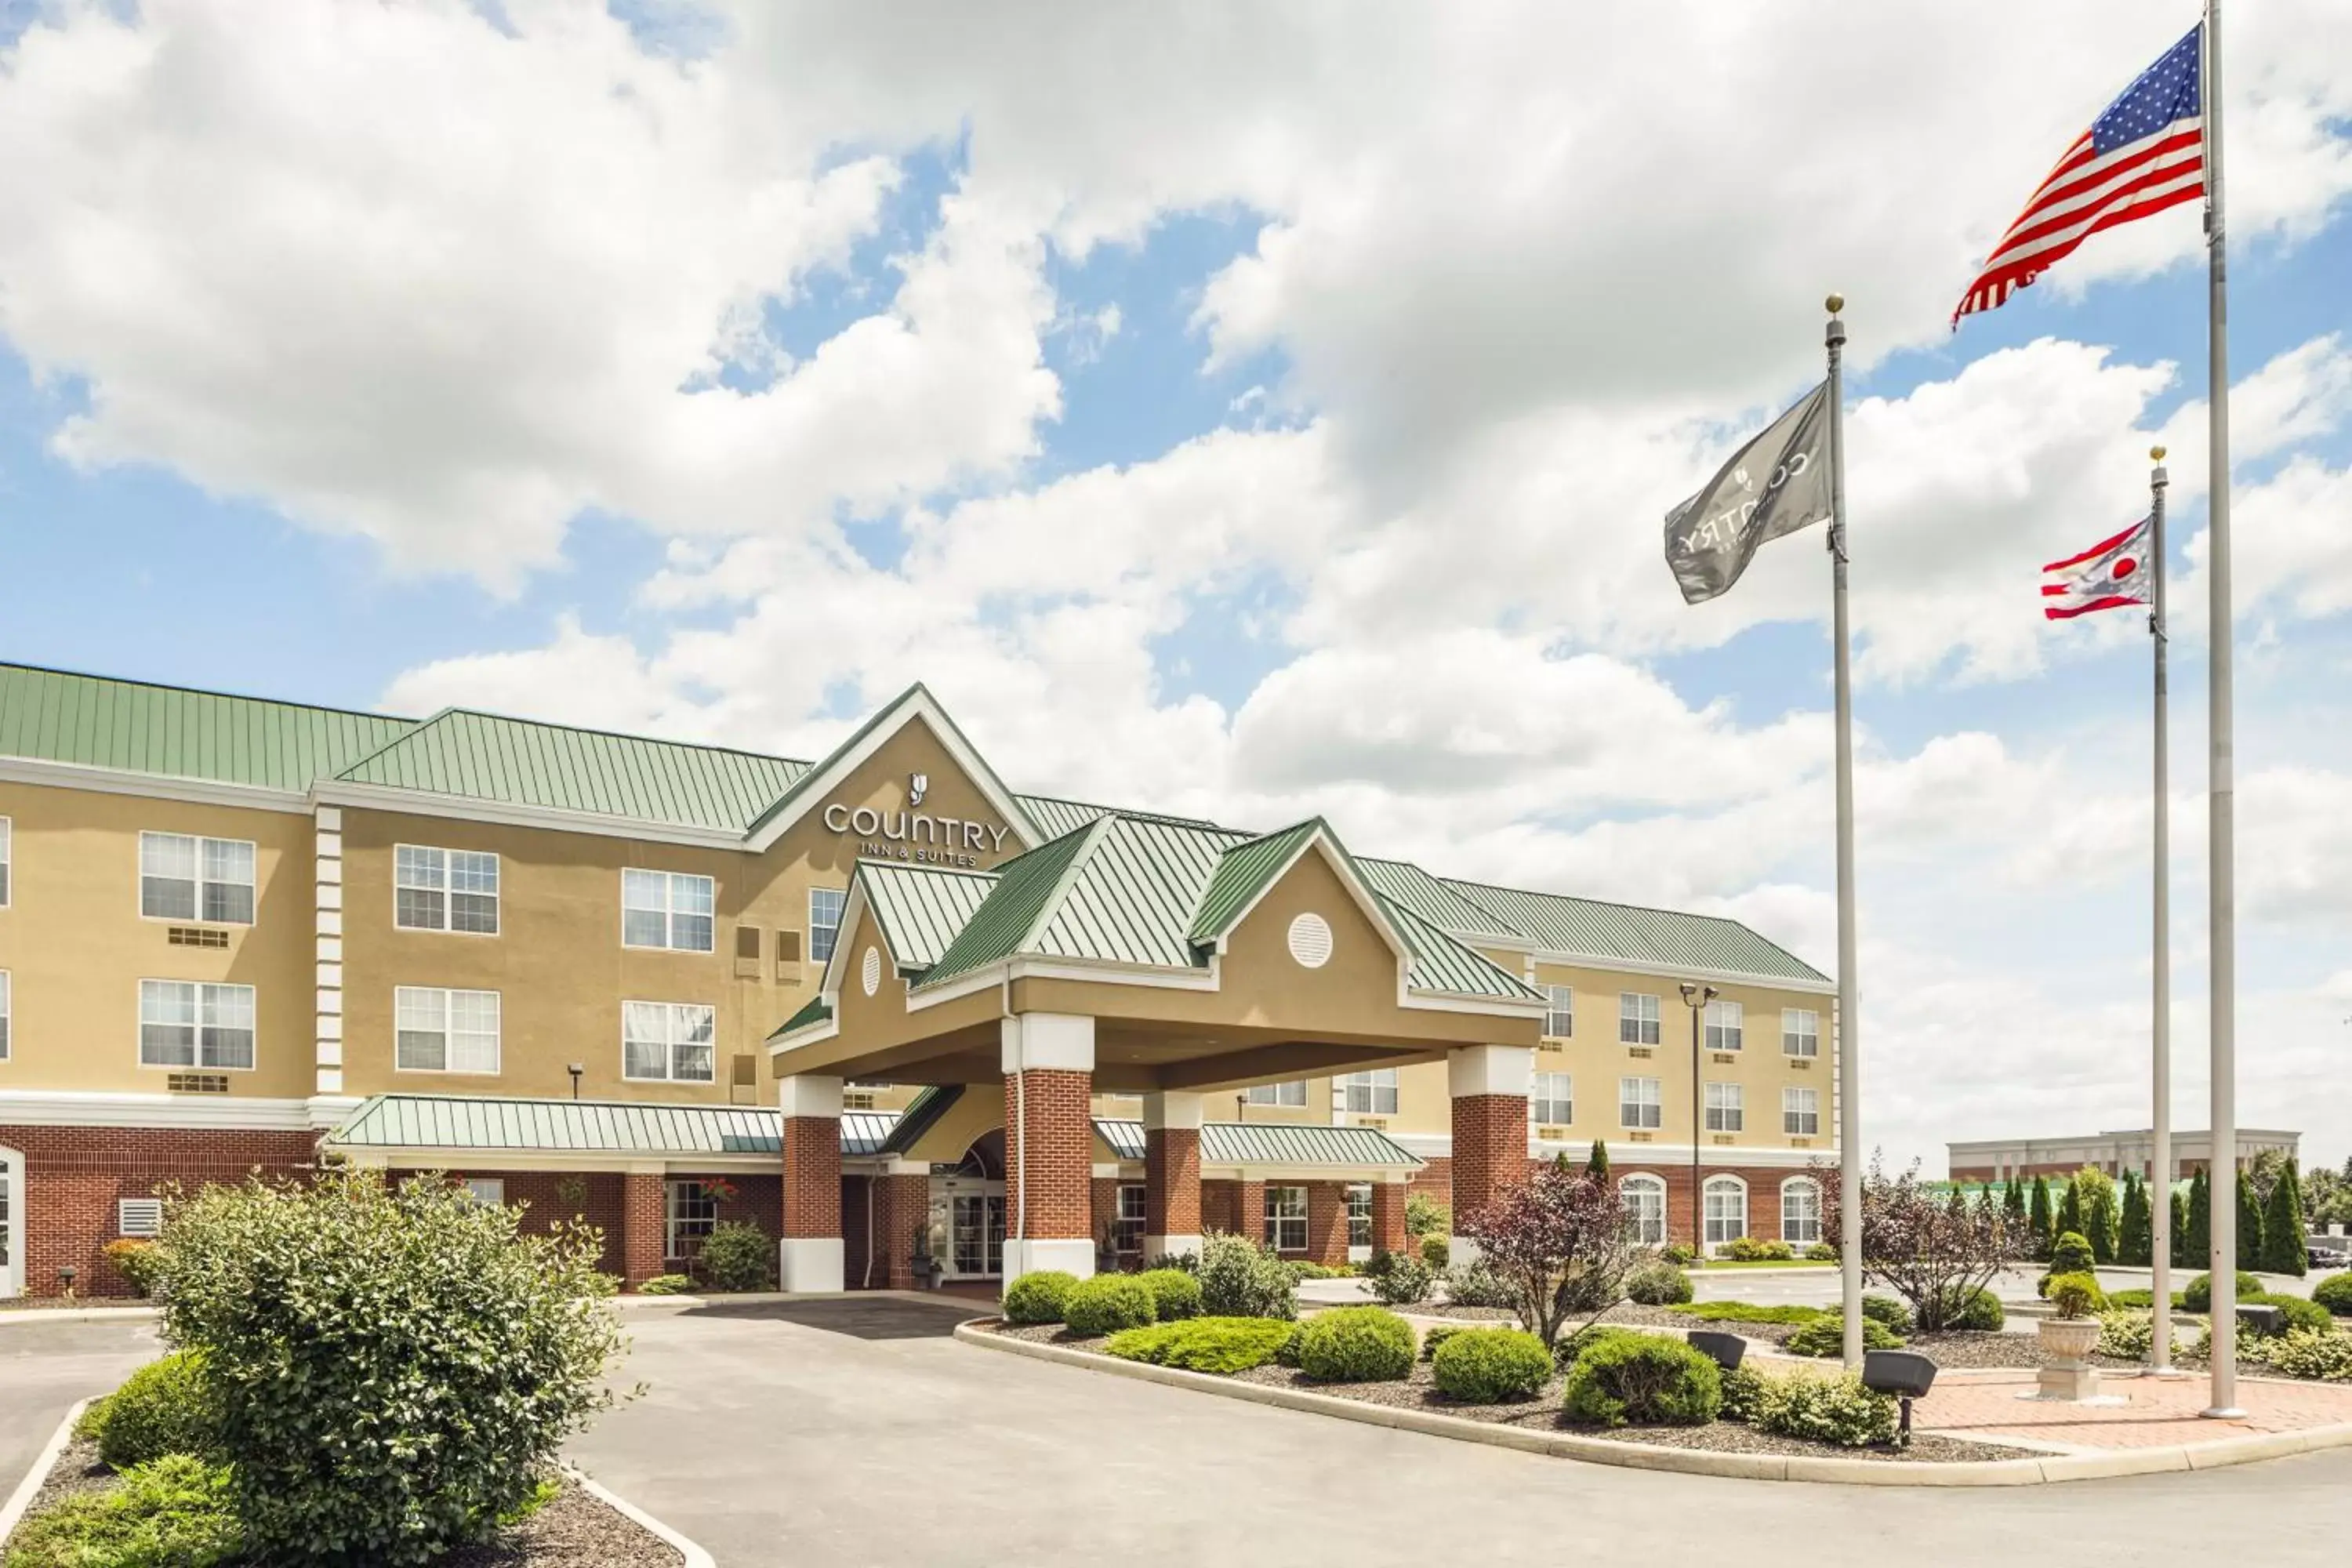 Facade/entrance, Property Building in Country Inn & Suites by Radisson, Findlay, OH